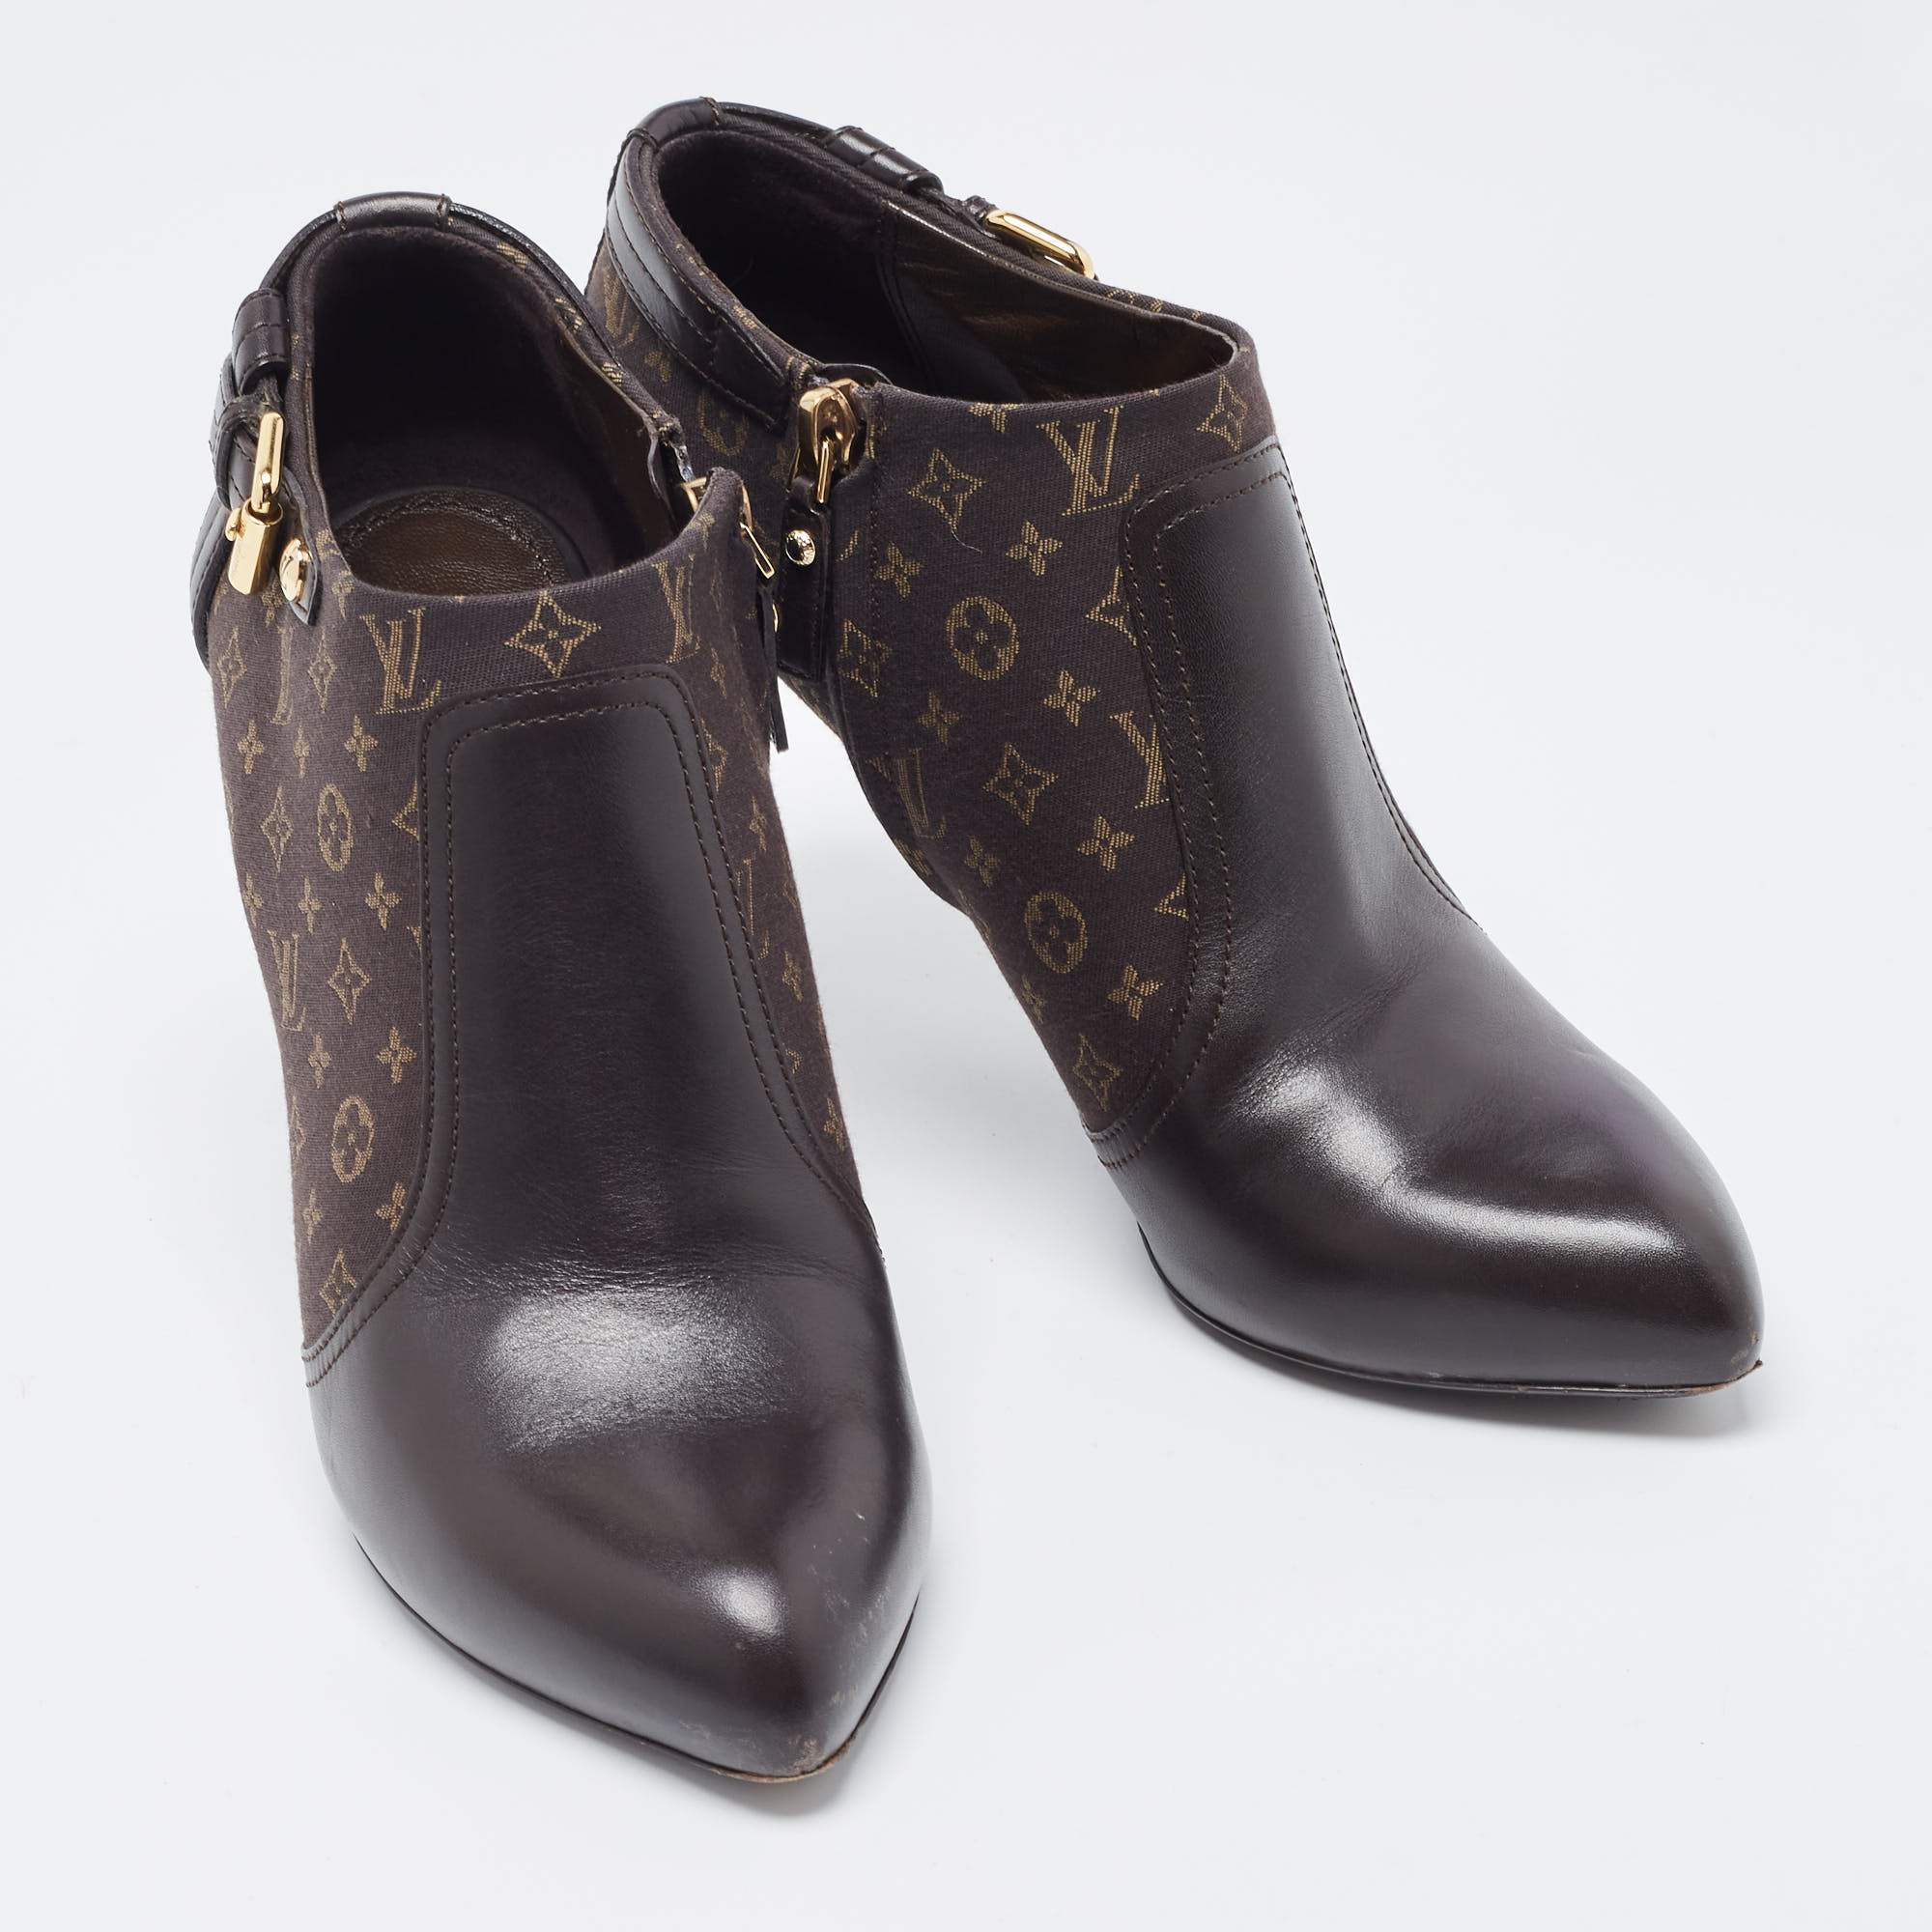 Louis Vuitton Brown Monogram Canvas And Leather Booties Size 38